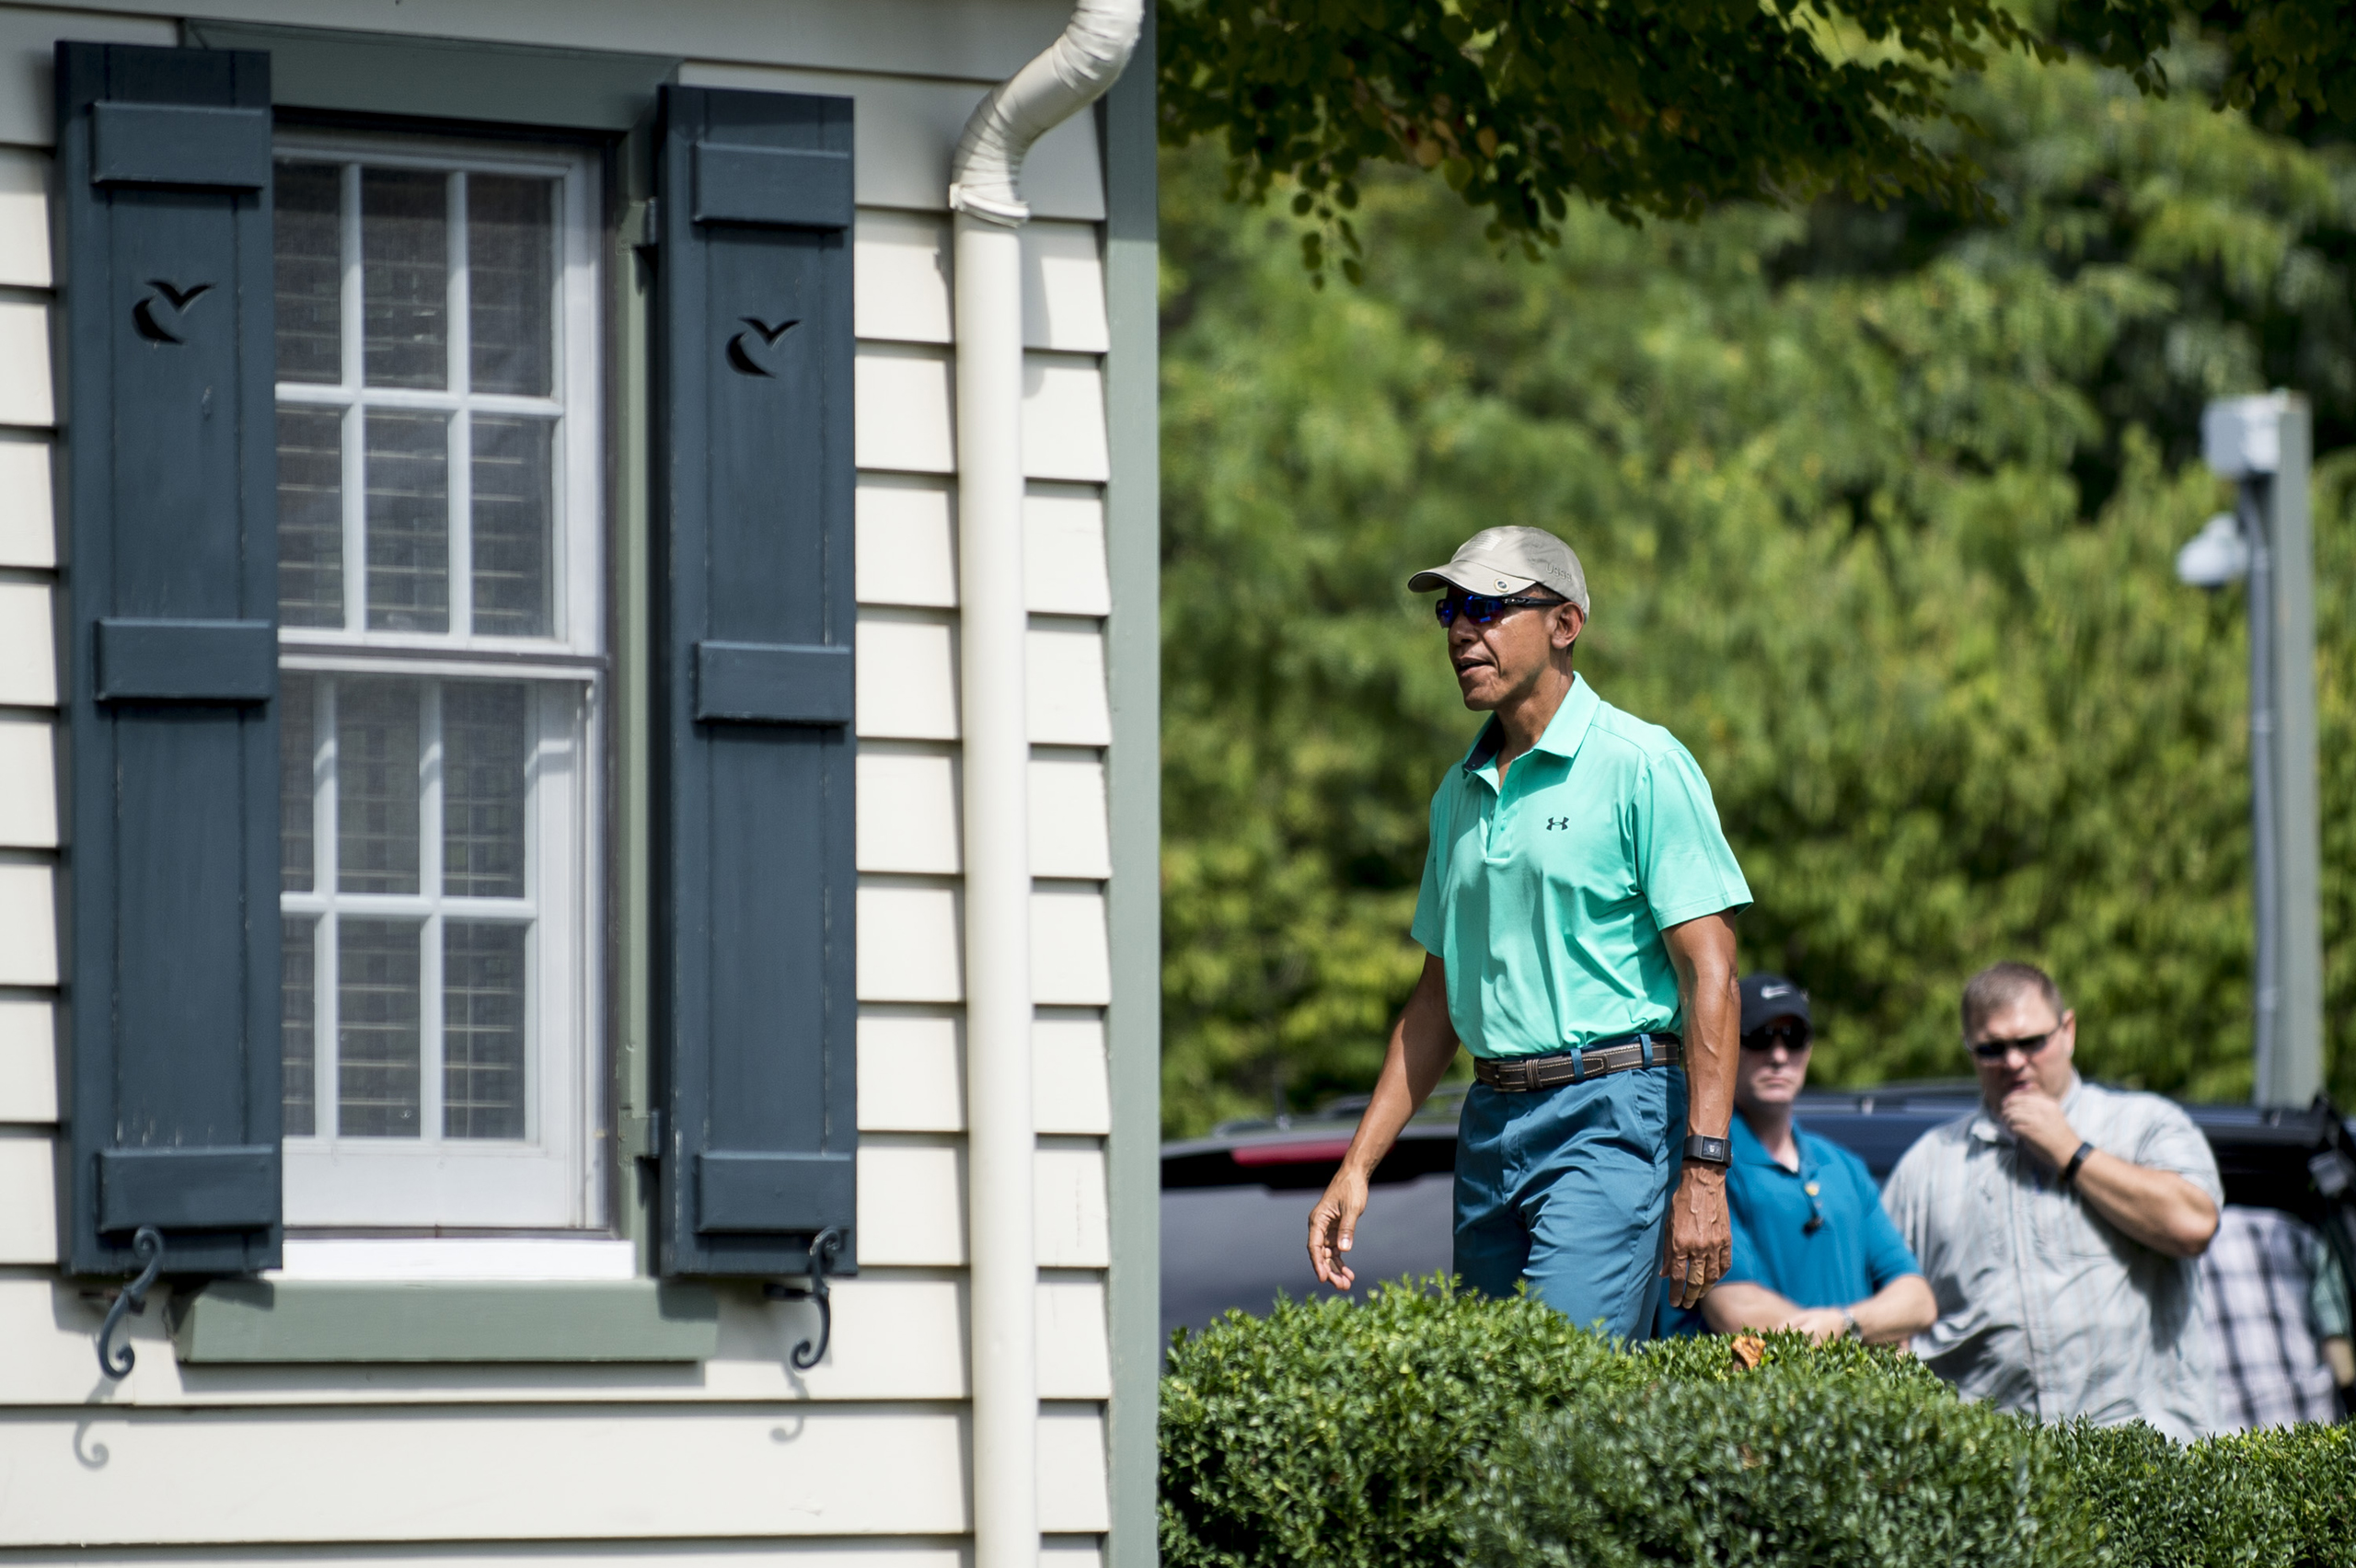 Obama arrives to play a round of golf at Caves Valley Golf Club in Owings Mills, Maryland on Sept. 10, 2016. (Pete Marovich—Pool/Getty Images)